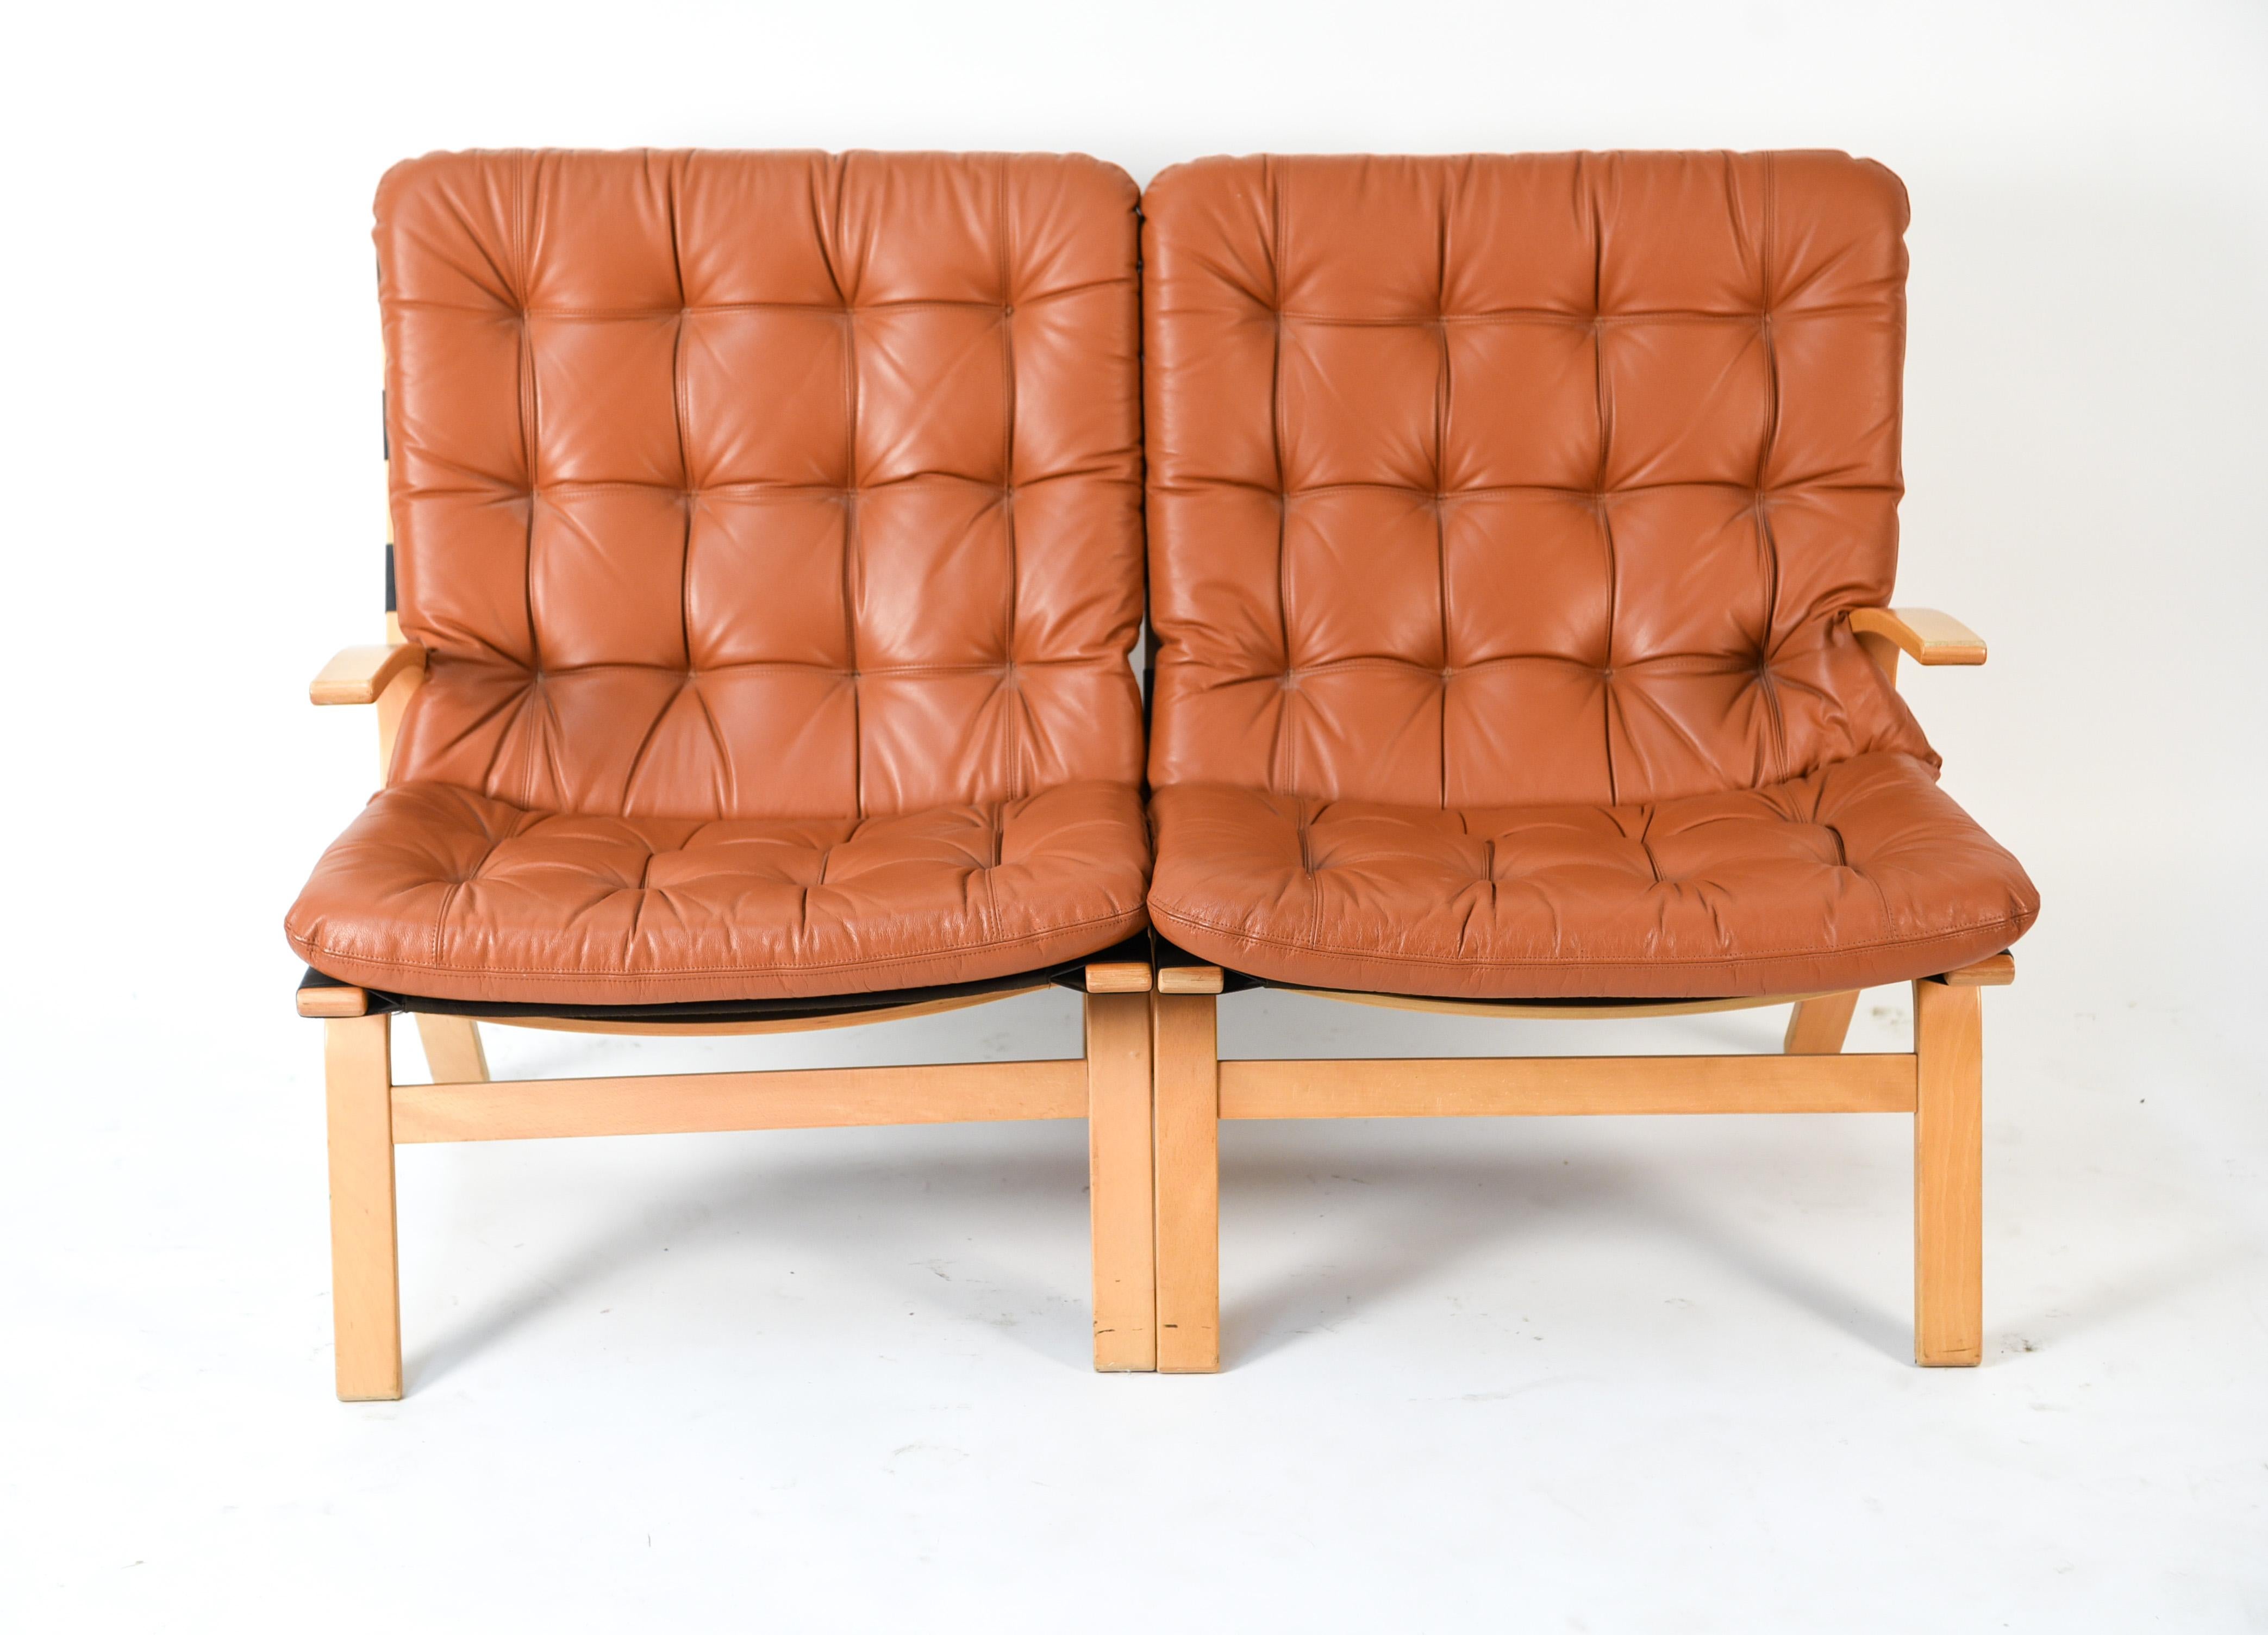 This Danish midcentury bentwood loveseat was made by Farstrup, circa 1970s. This two-seat sofa features tufted cushions which provide an element of texture juxtaposed against the smooth bentwood frame.